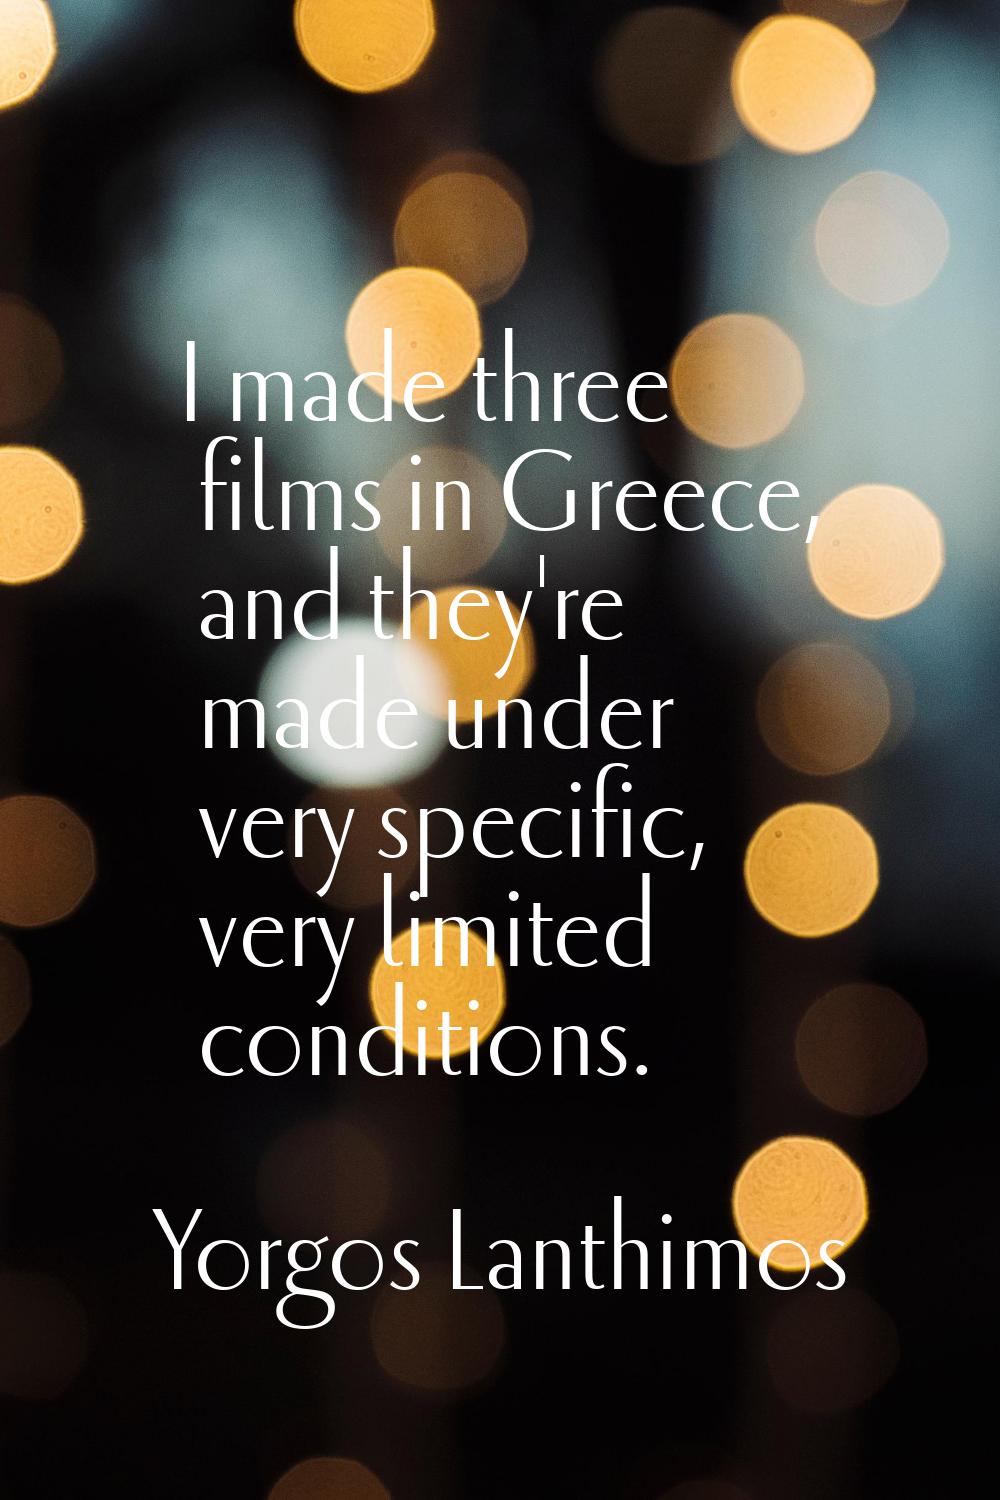 I made three films in Greece, and they're made under very specific, very limited conditions.